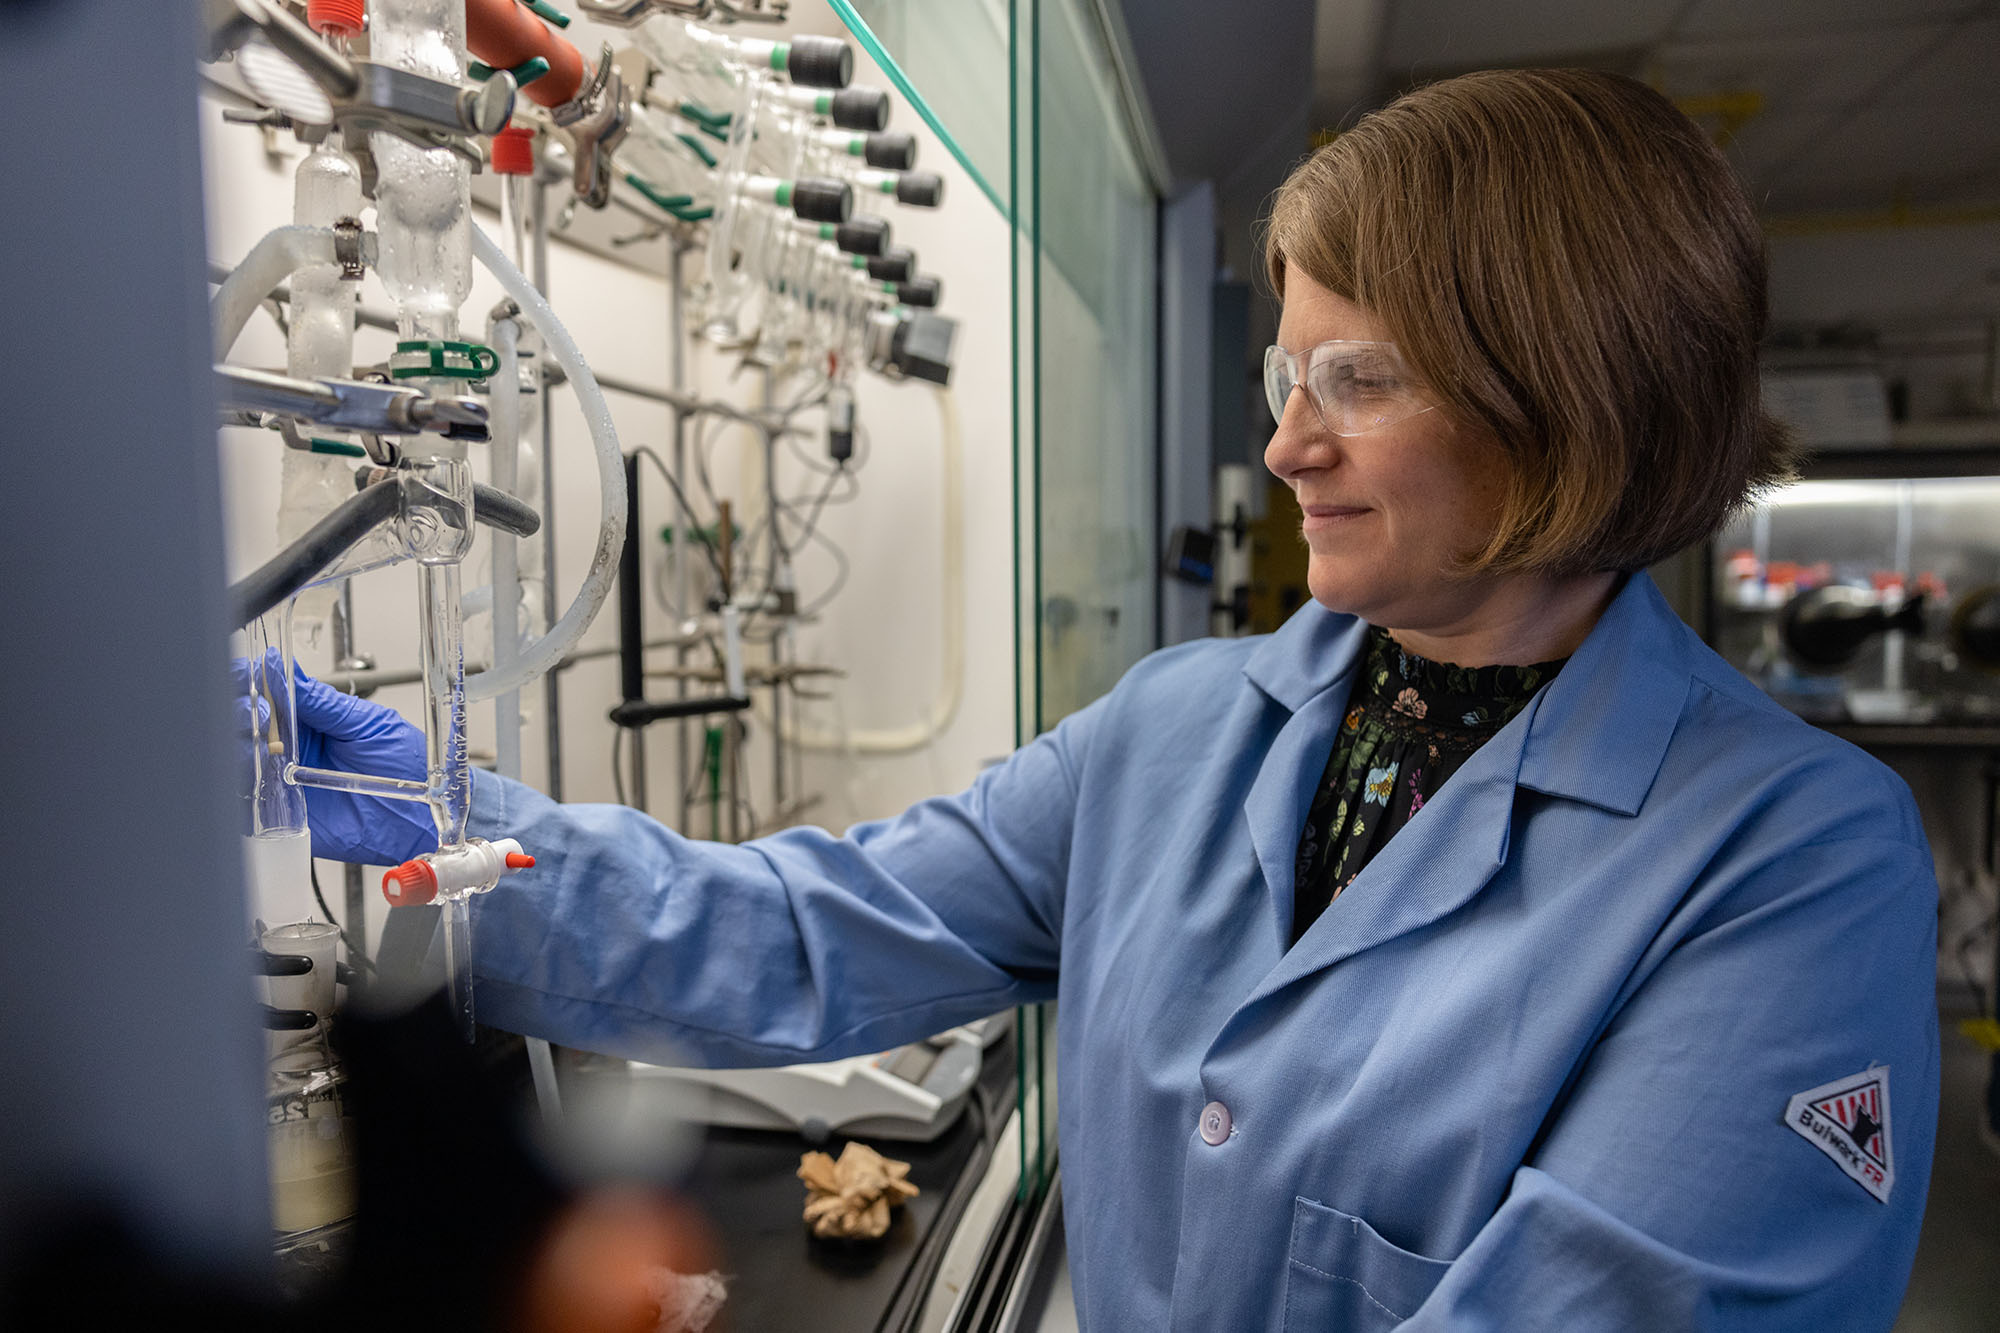 Robertson, who has her Ph.D. in chemical engineering, has been a UH faculty member since 2010. 